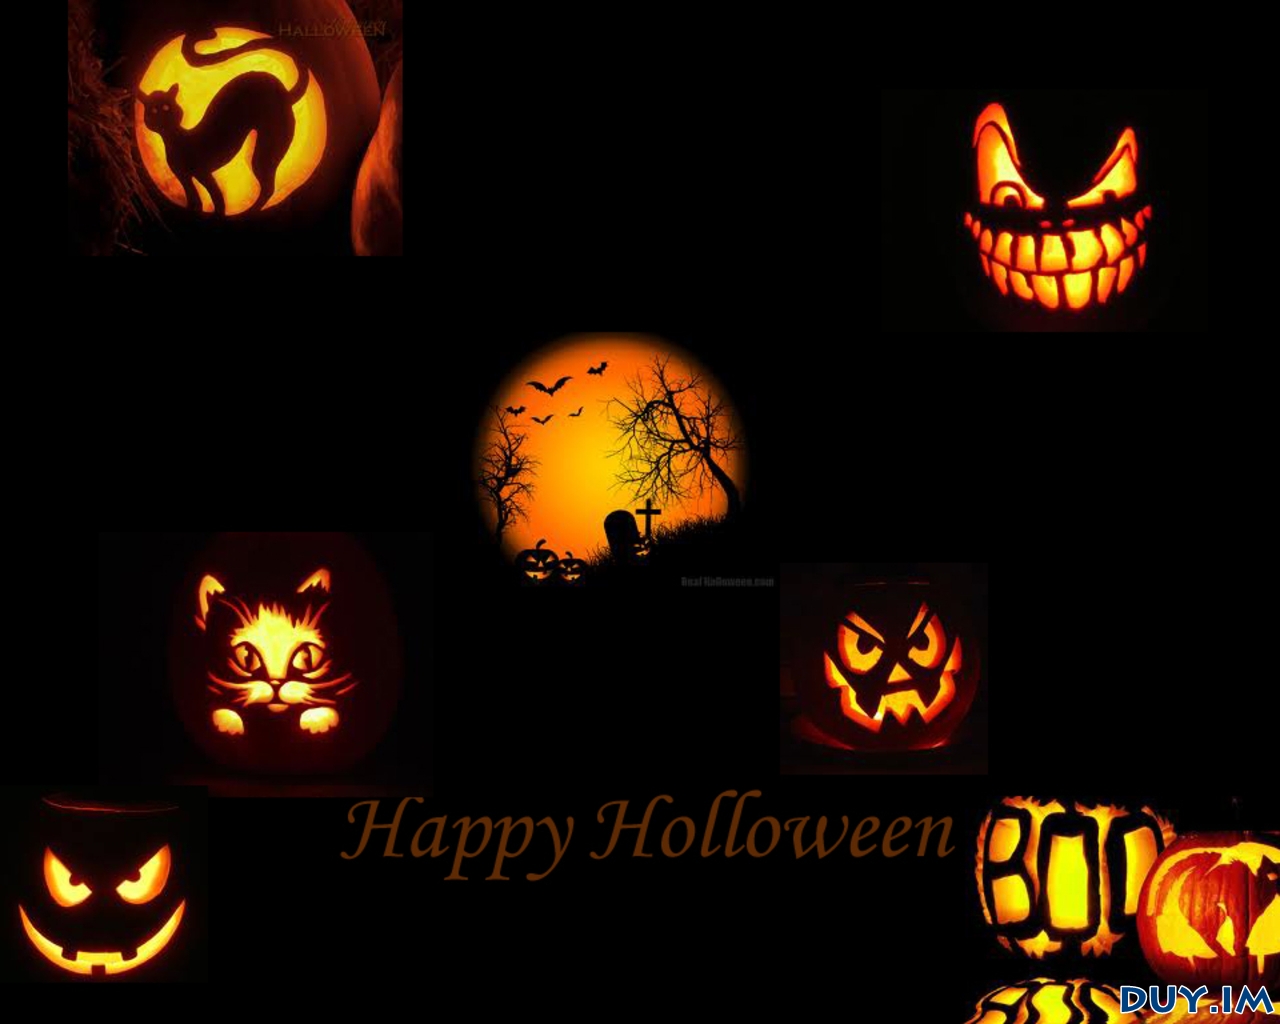 Daily Cool Pictures Gallery Halloween Wallpaper